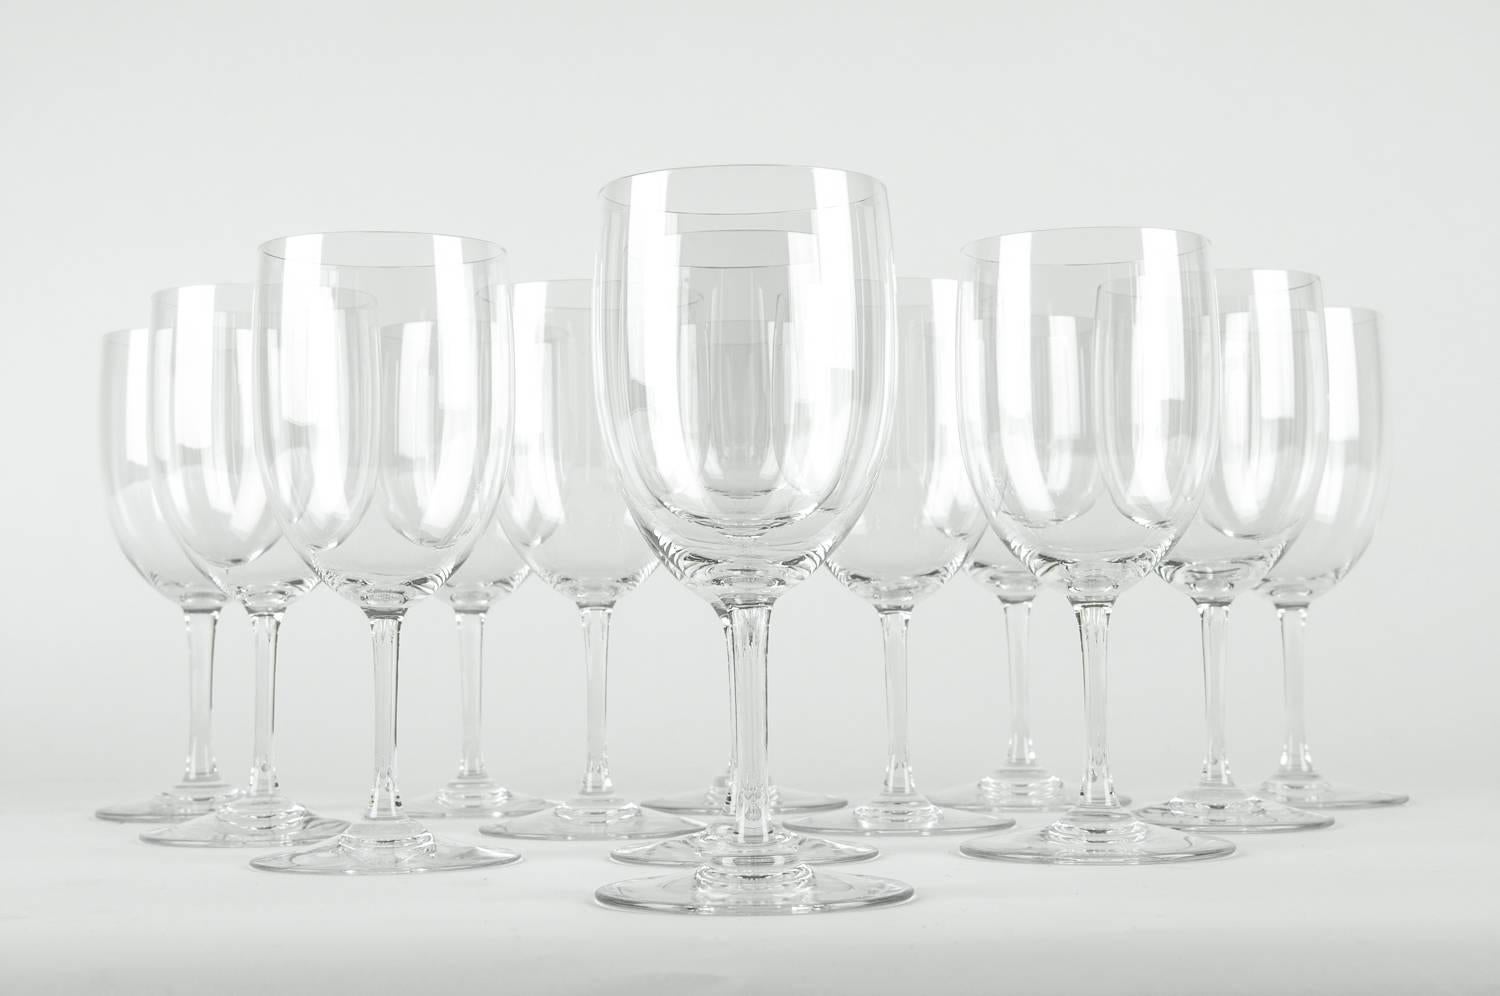 Vintage Baccarat crystal Art Deco style wine / water glassware set of 12 pieces. Each glass is in excellent condition. Maker's mark undersigned. Each glass measure about 6 inches high x 2.5 inches diameter.